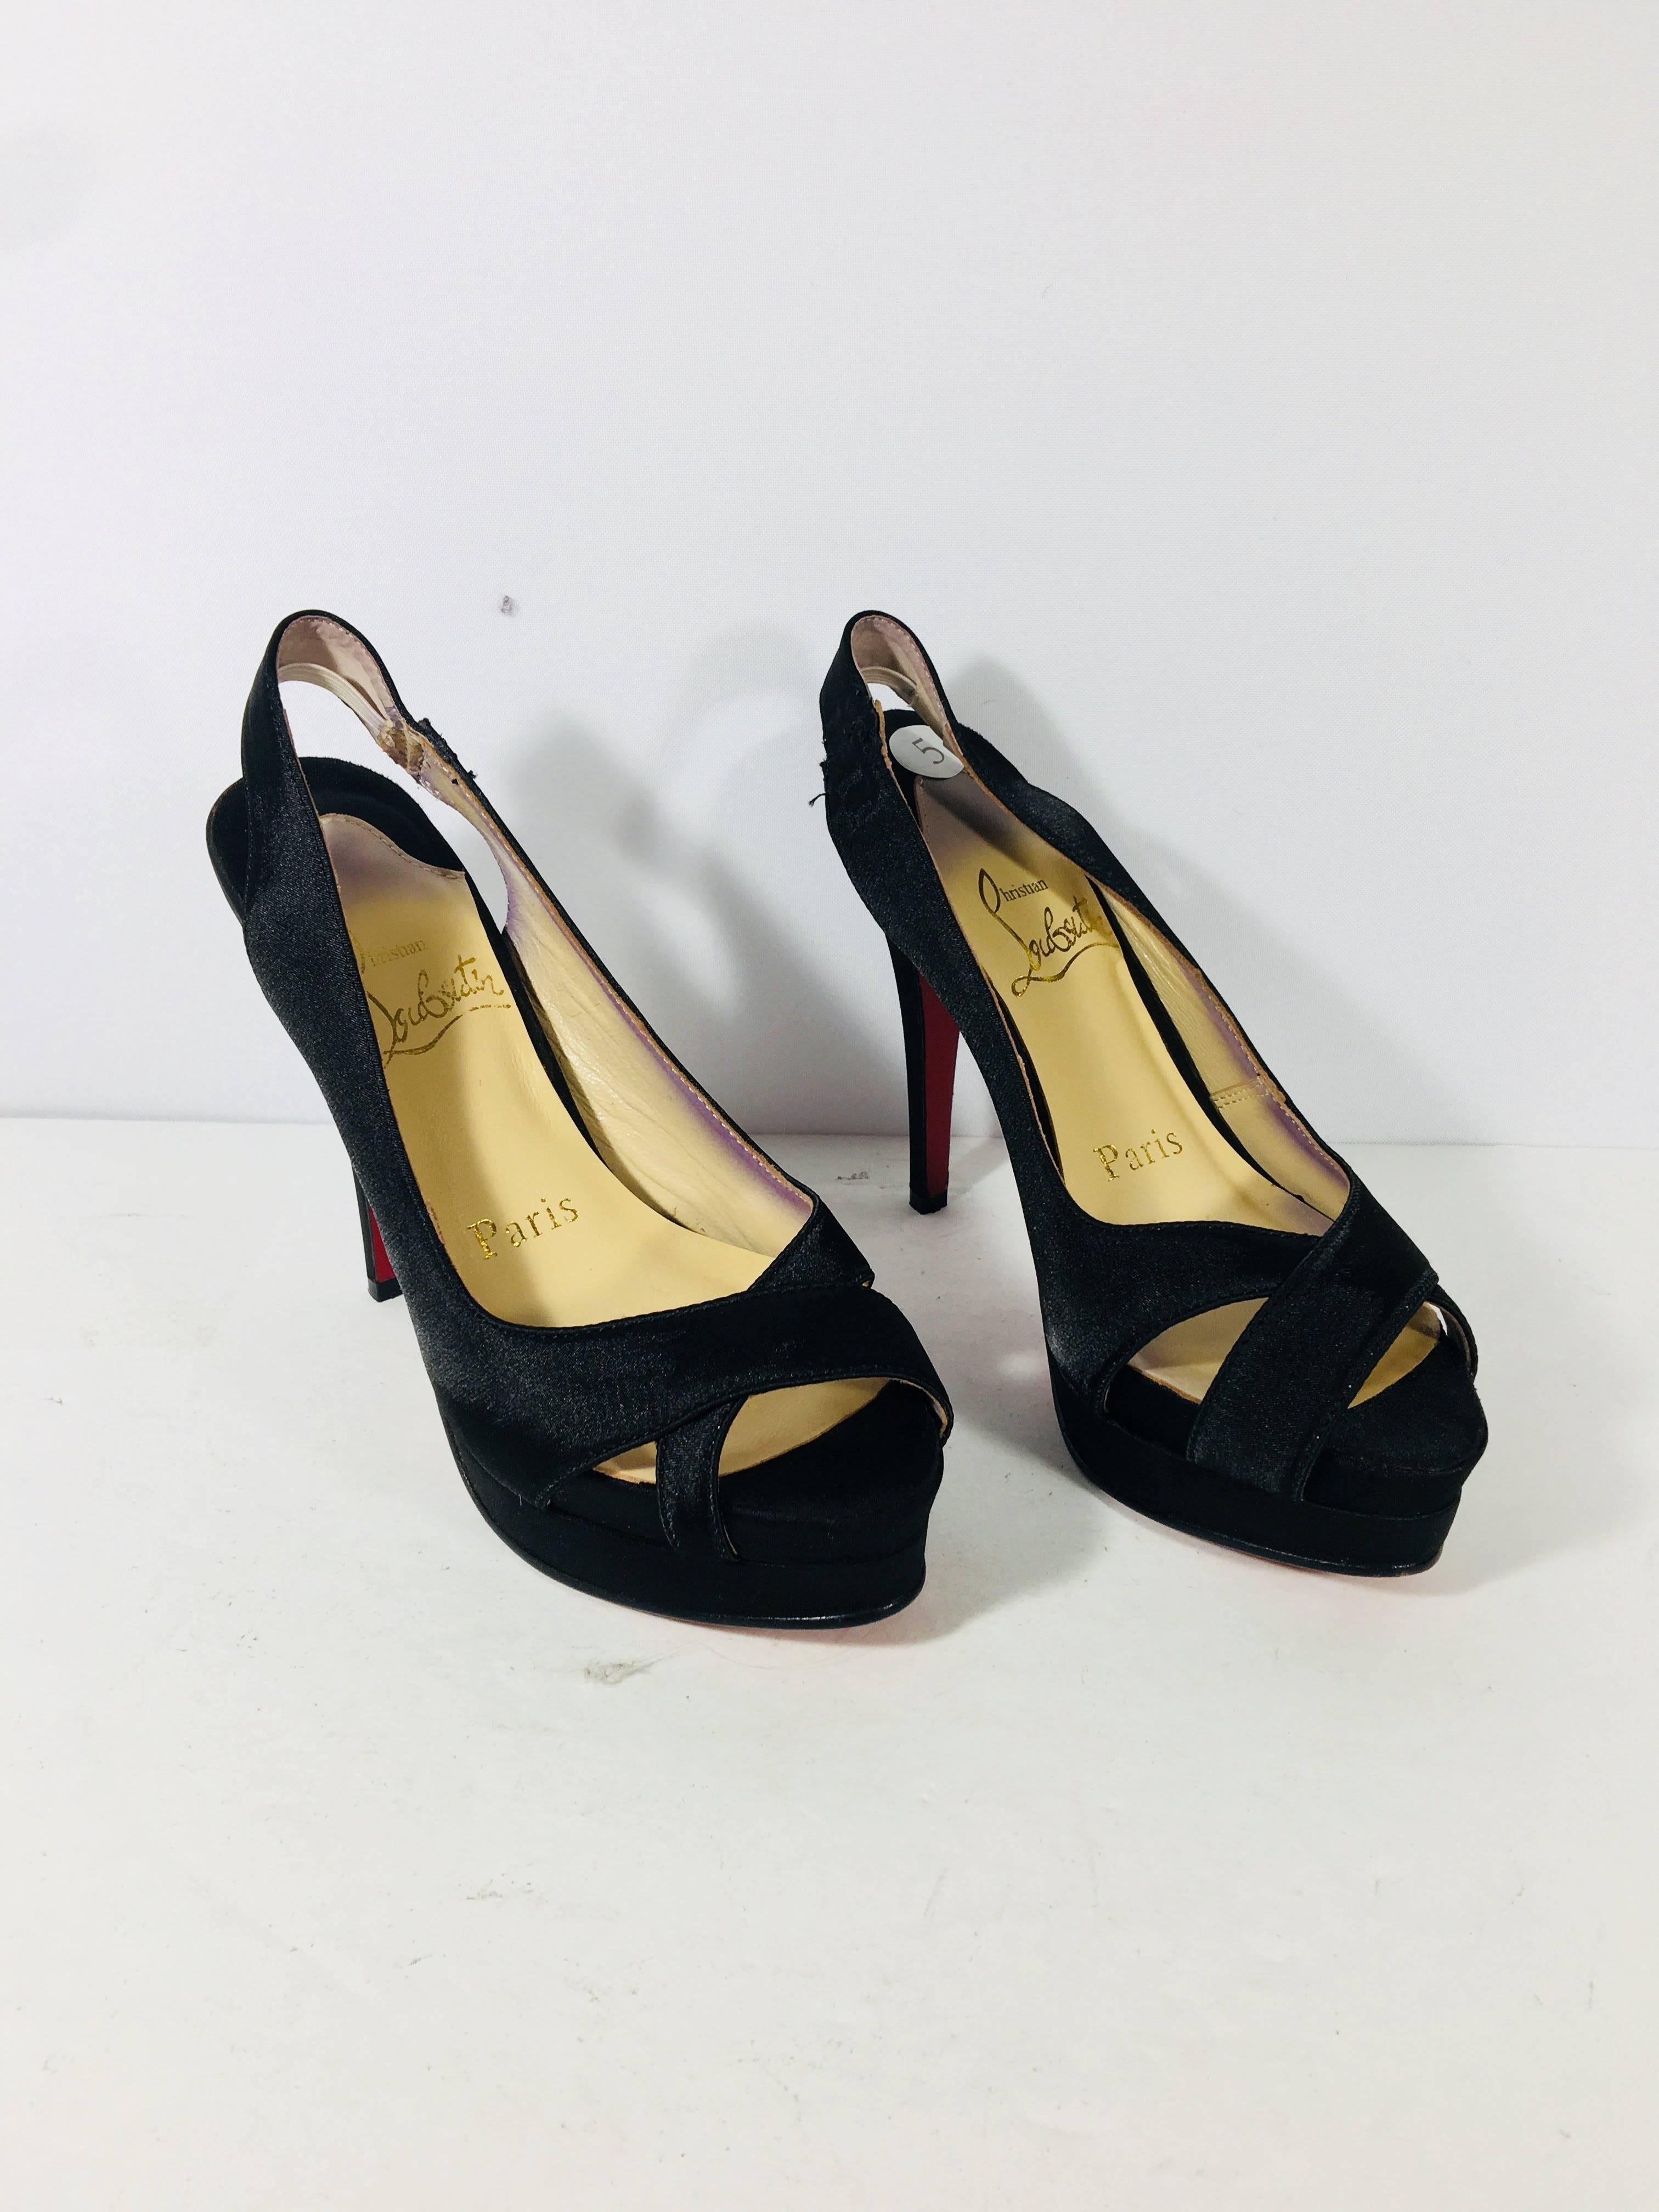 Christian Louboutin Peep Toe Slingback Heels with Criss Cross Straps at Toe and Platform.